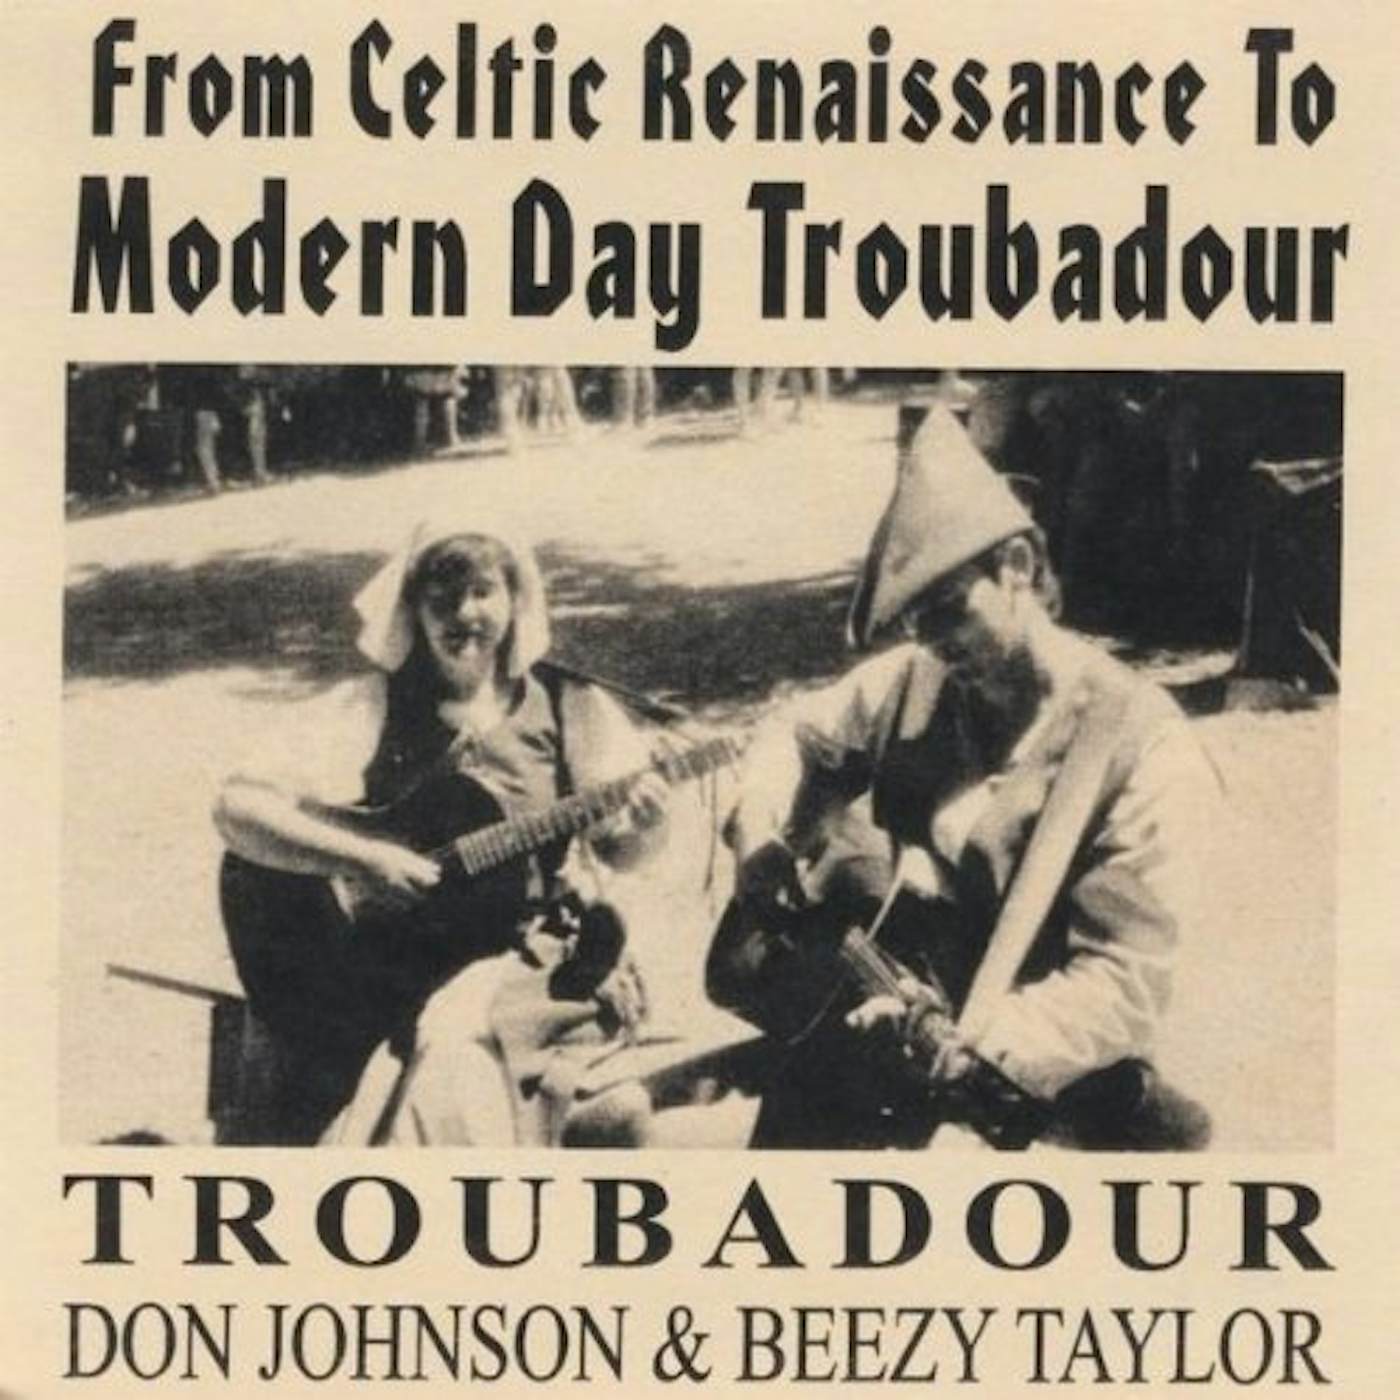 FROM CELTIC RENAISSANCE TO MODERN DAY TROUBADOUR CD